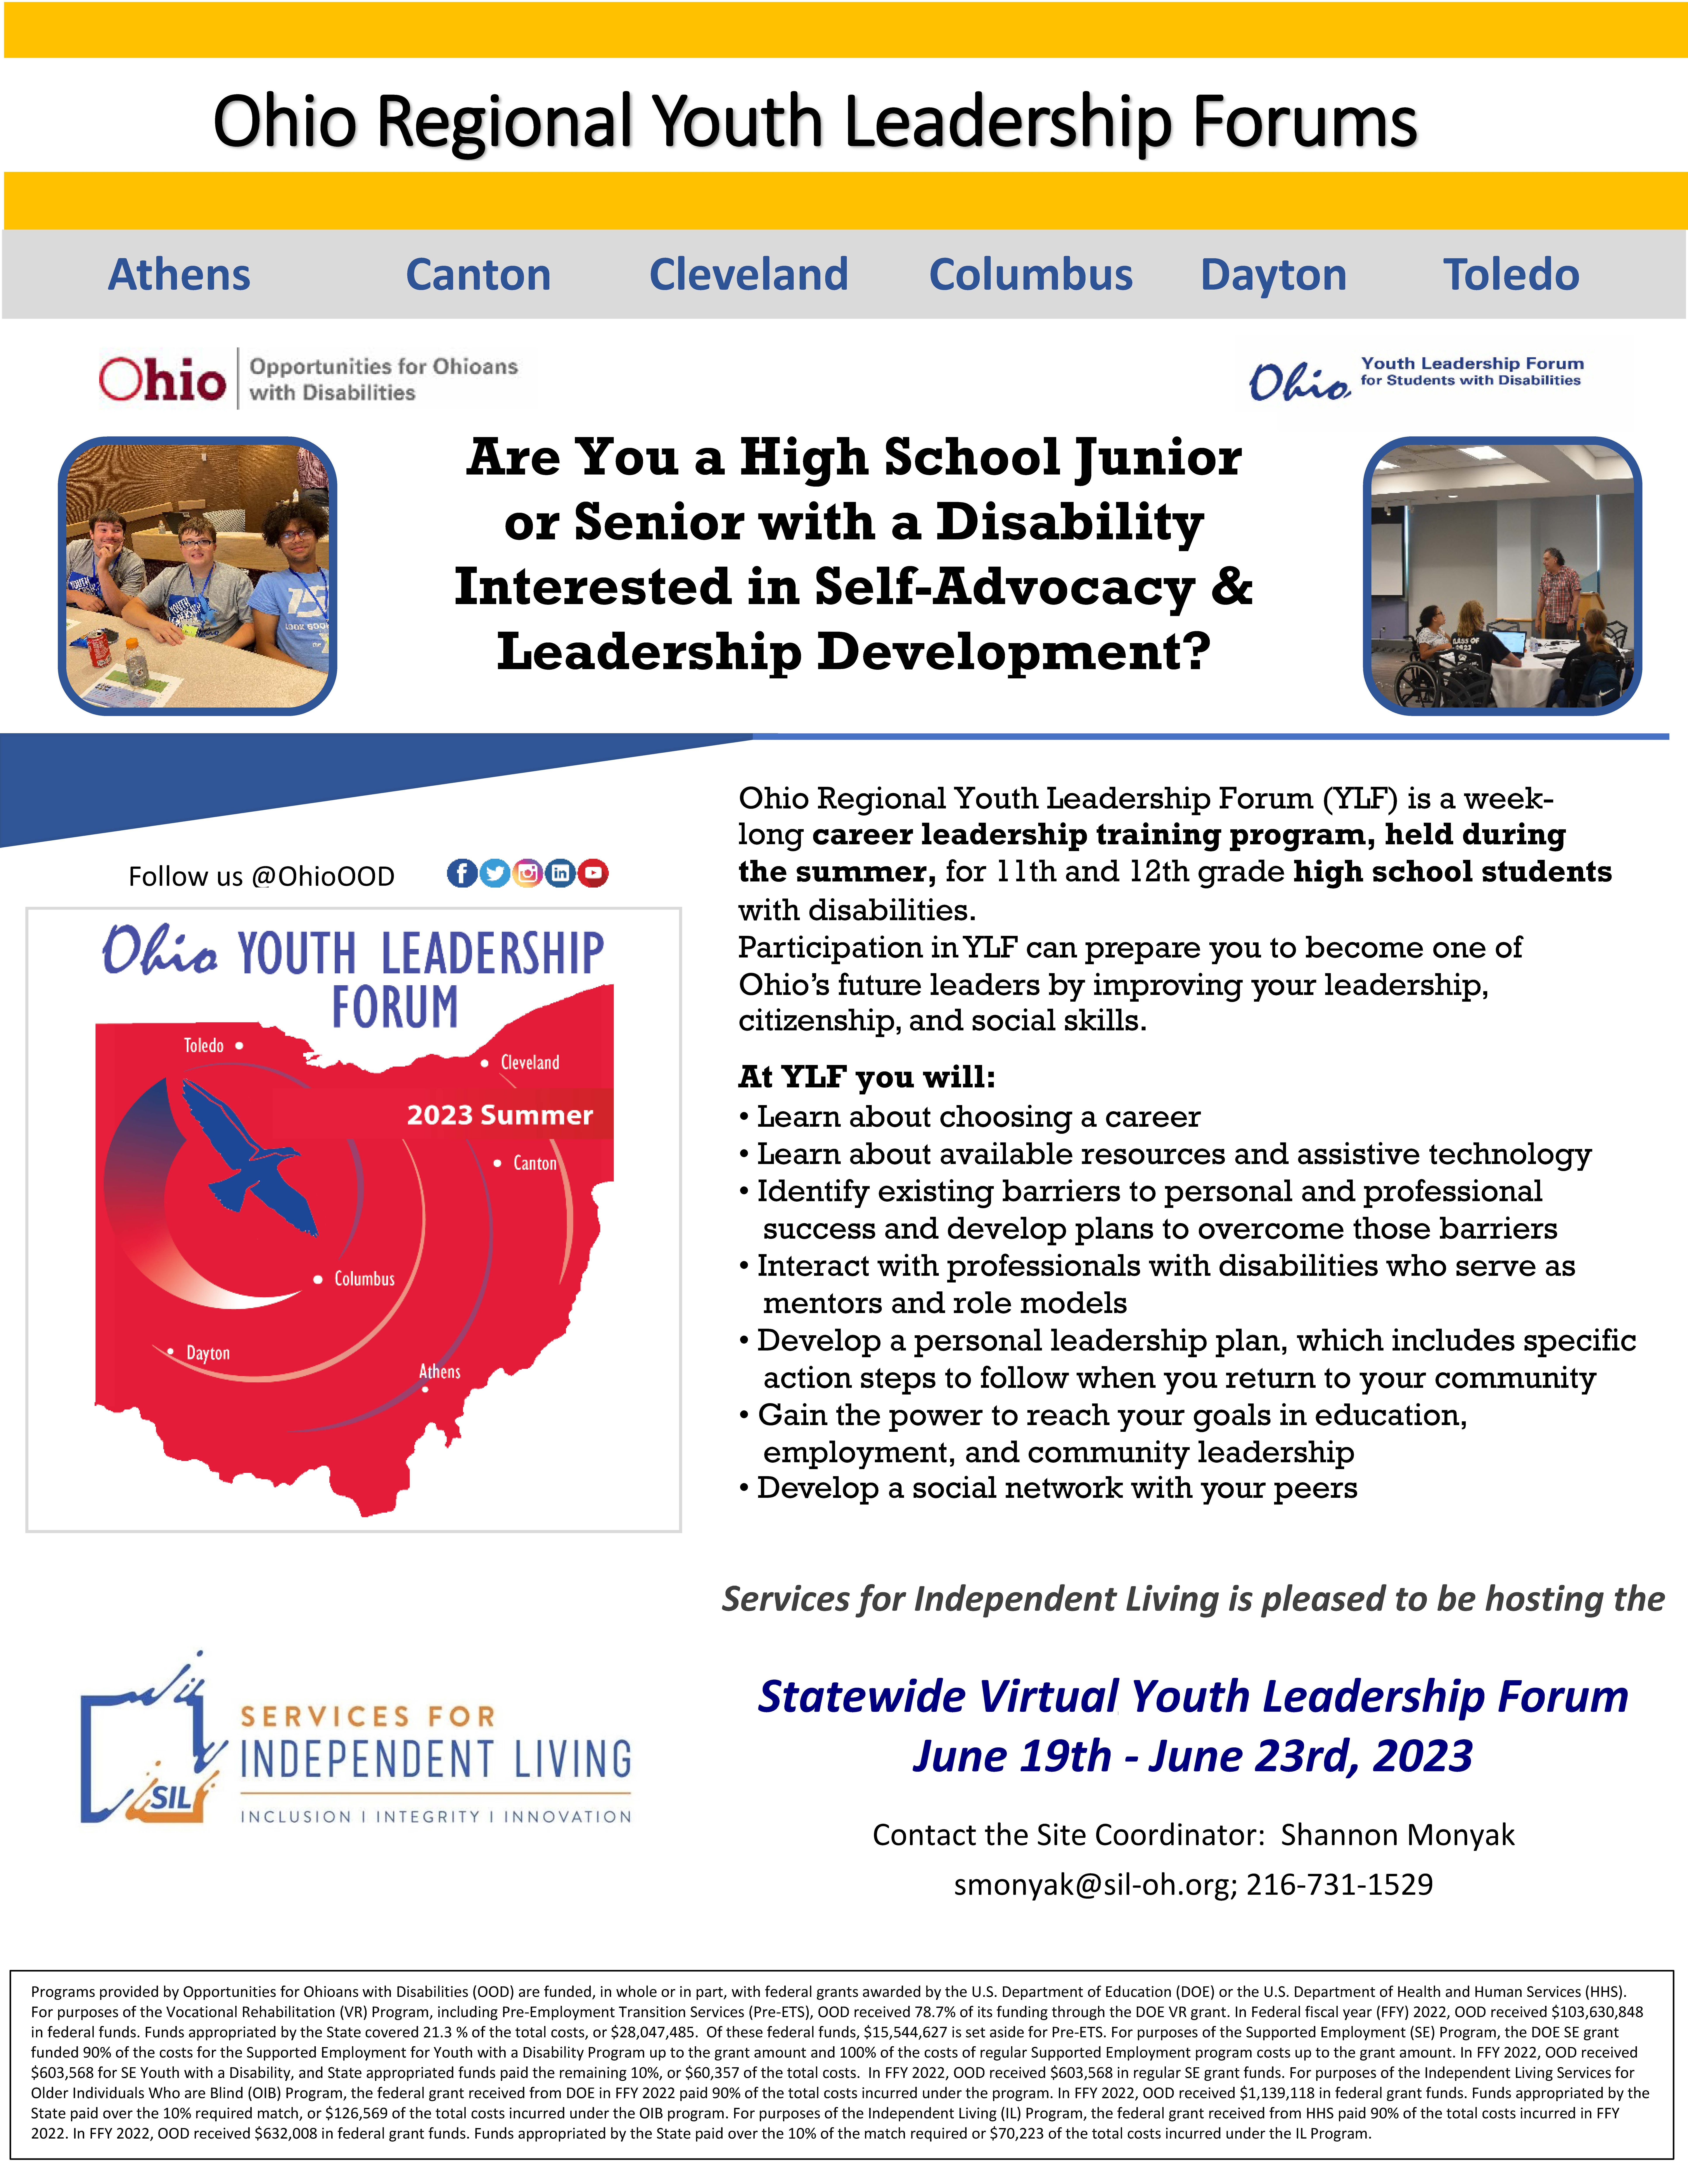 Services for Independent Living is pleased to be hosting the  Statewide Virtual Youth Leadership Forum (YLF) June 19th - June 23rd, 2023. For more information regarding Services for Independent Living's Statewide Virtual Youth Leadership Forum please contact Shannon Monyak at smonyak@sil-oh.org.